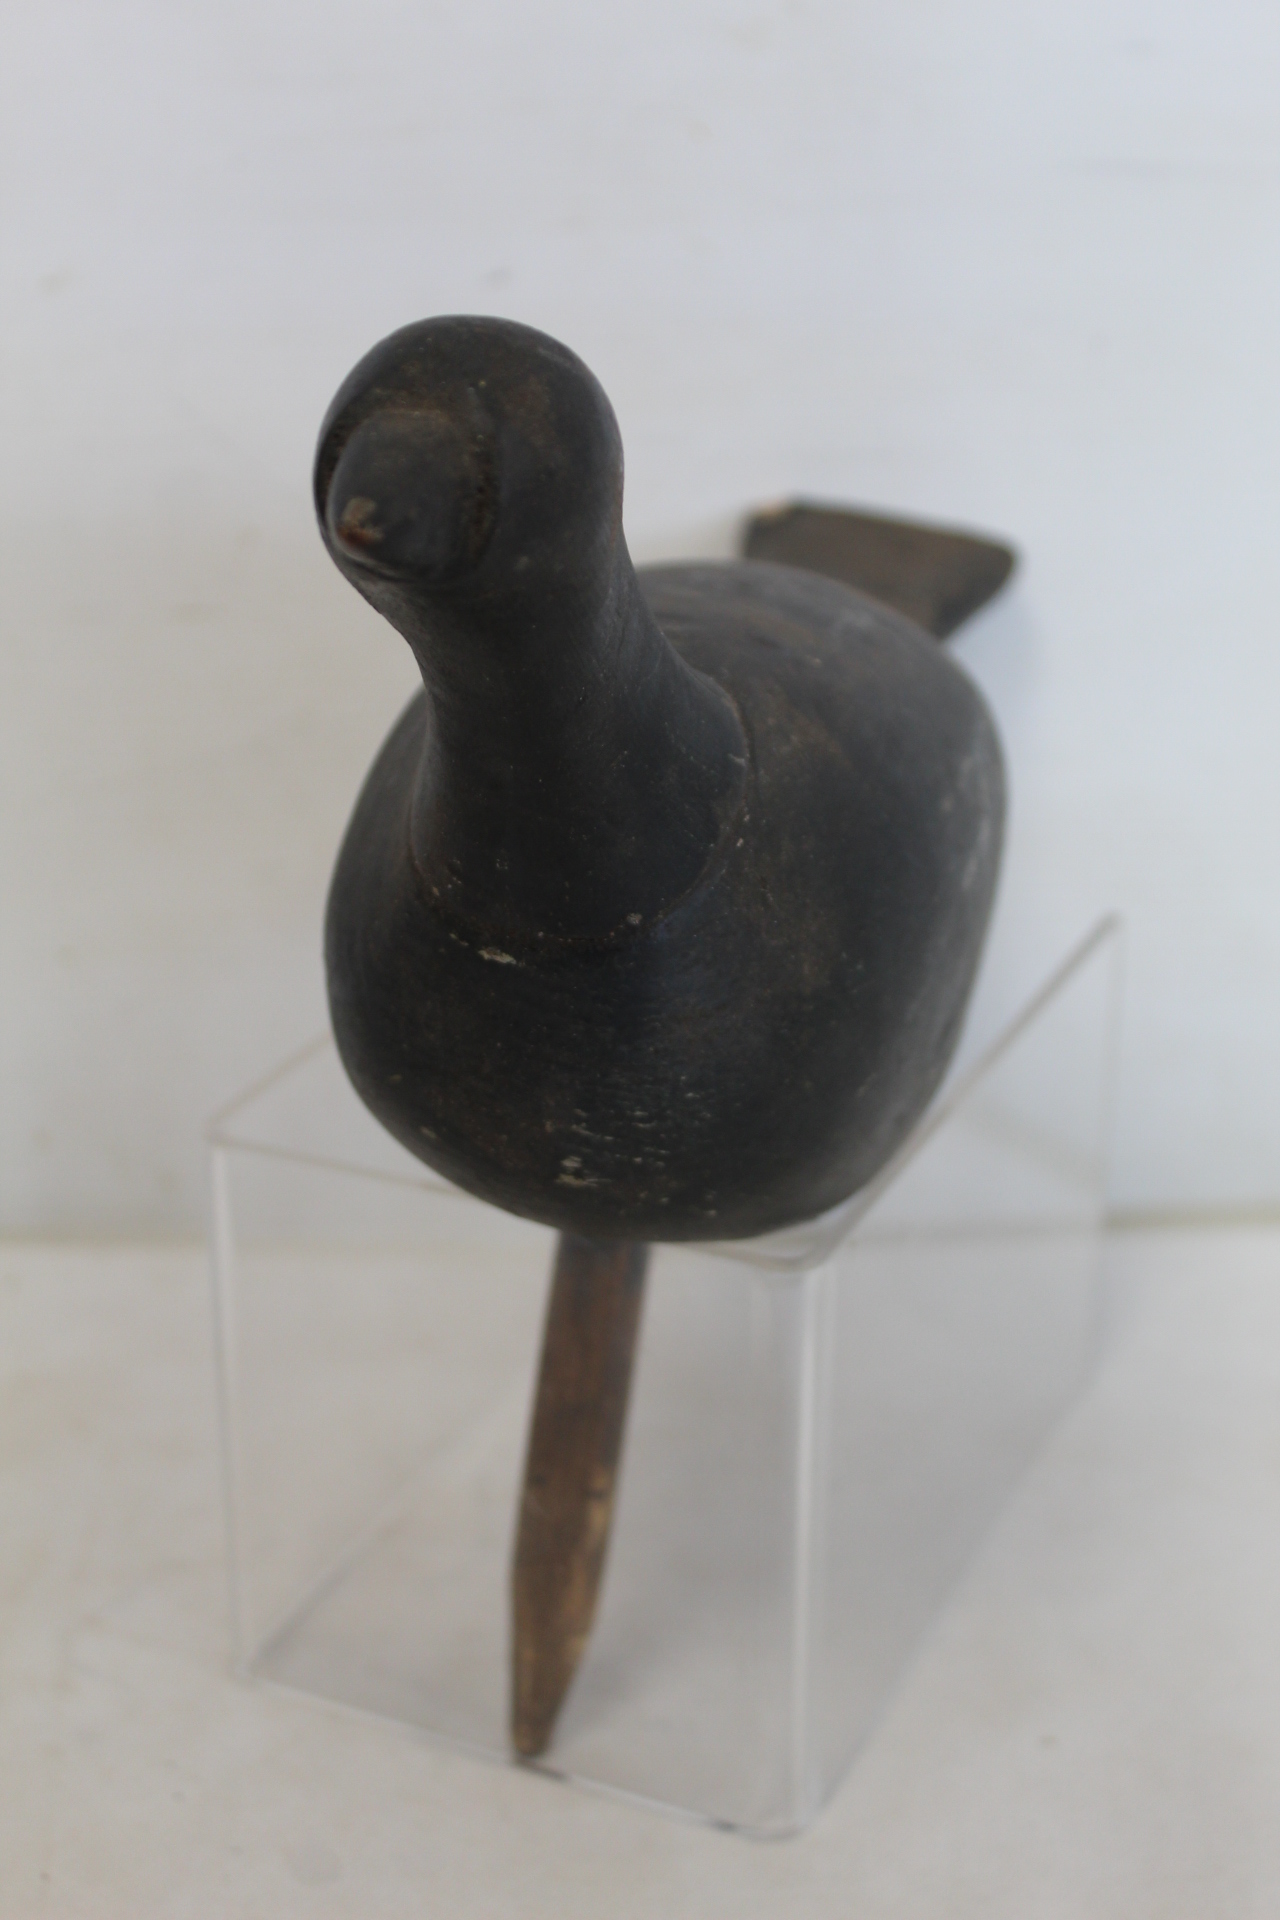 Antique wooden bird decoy with grey painted finish and peg base, 23.5cm high and 31cm long. - Image 3 of 13